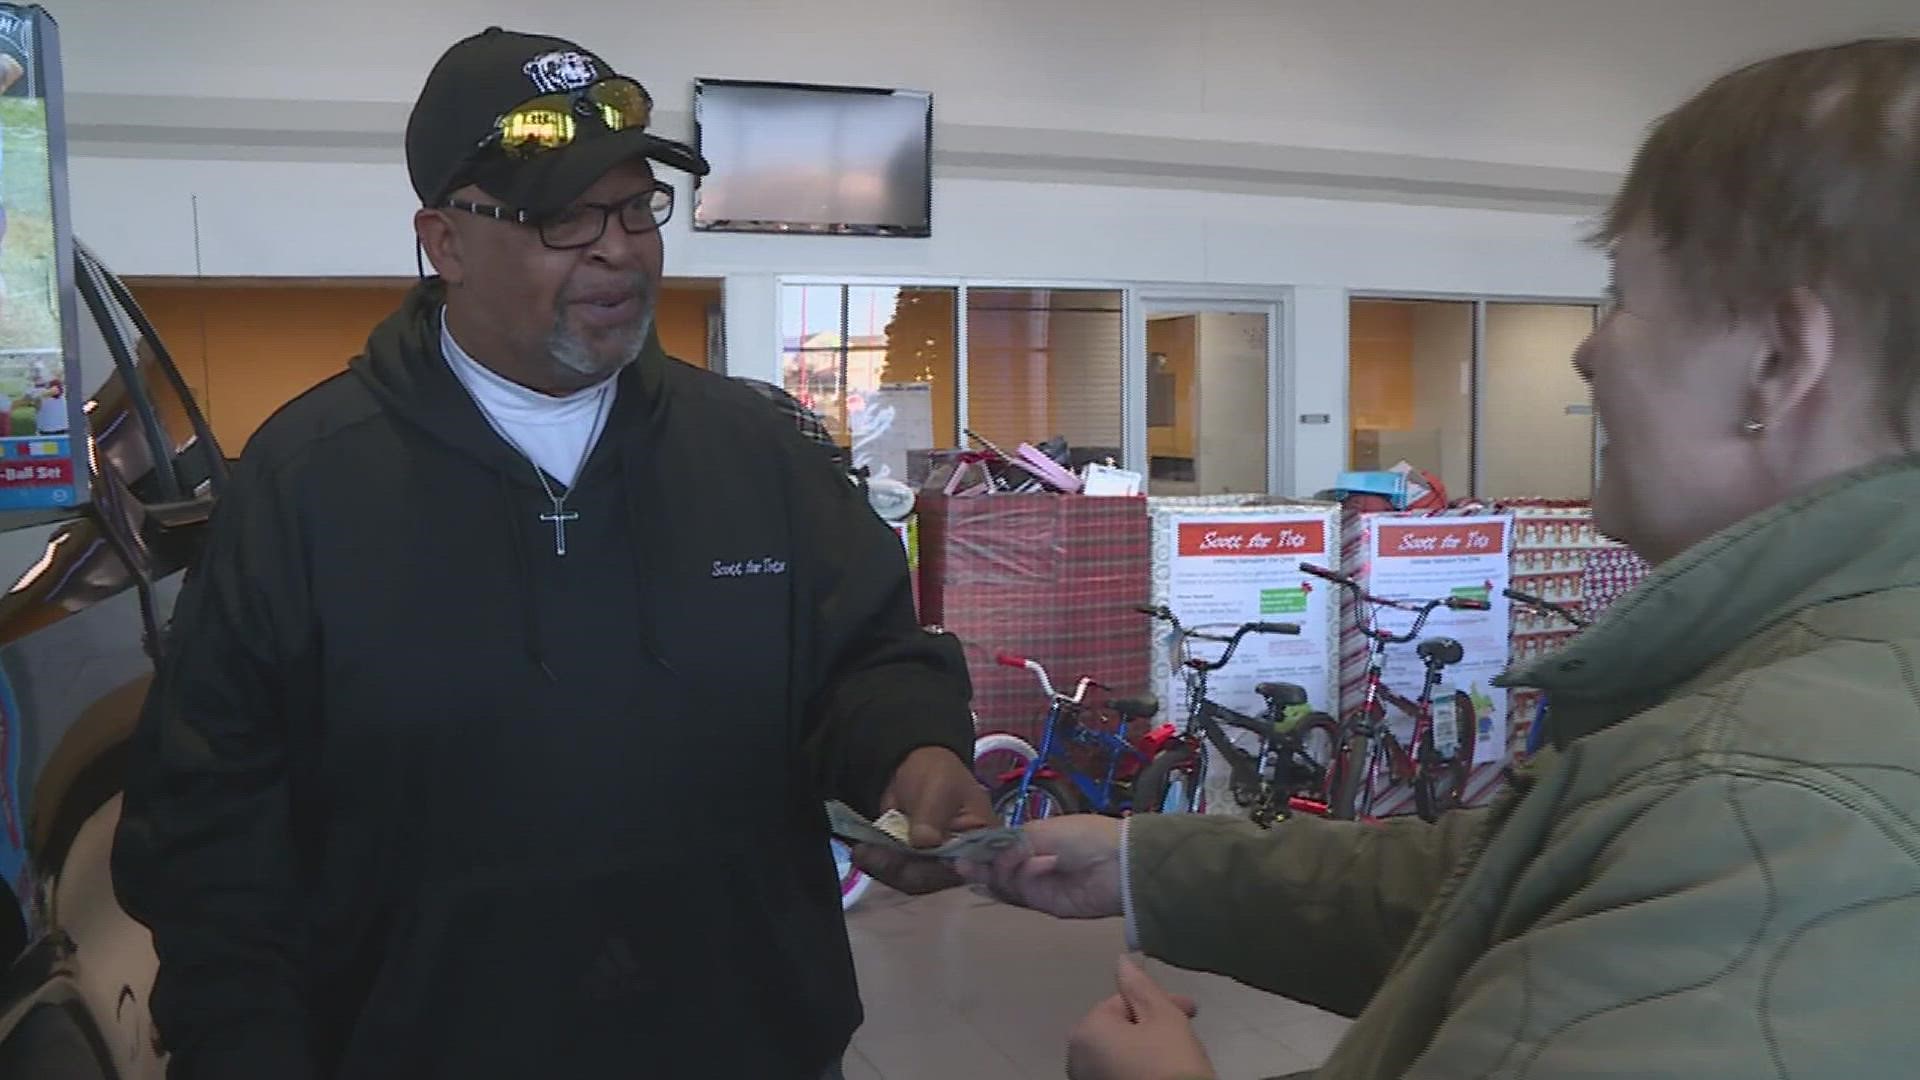 Scott Stubblefield is making Christmas a little brighter for thousands of kids in Clinton County through the 'Scott for Tots' toy drive.